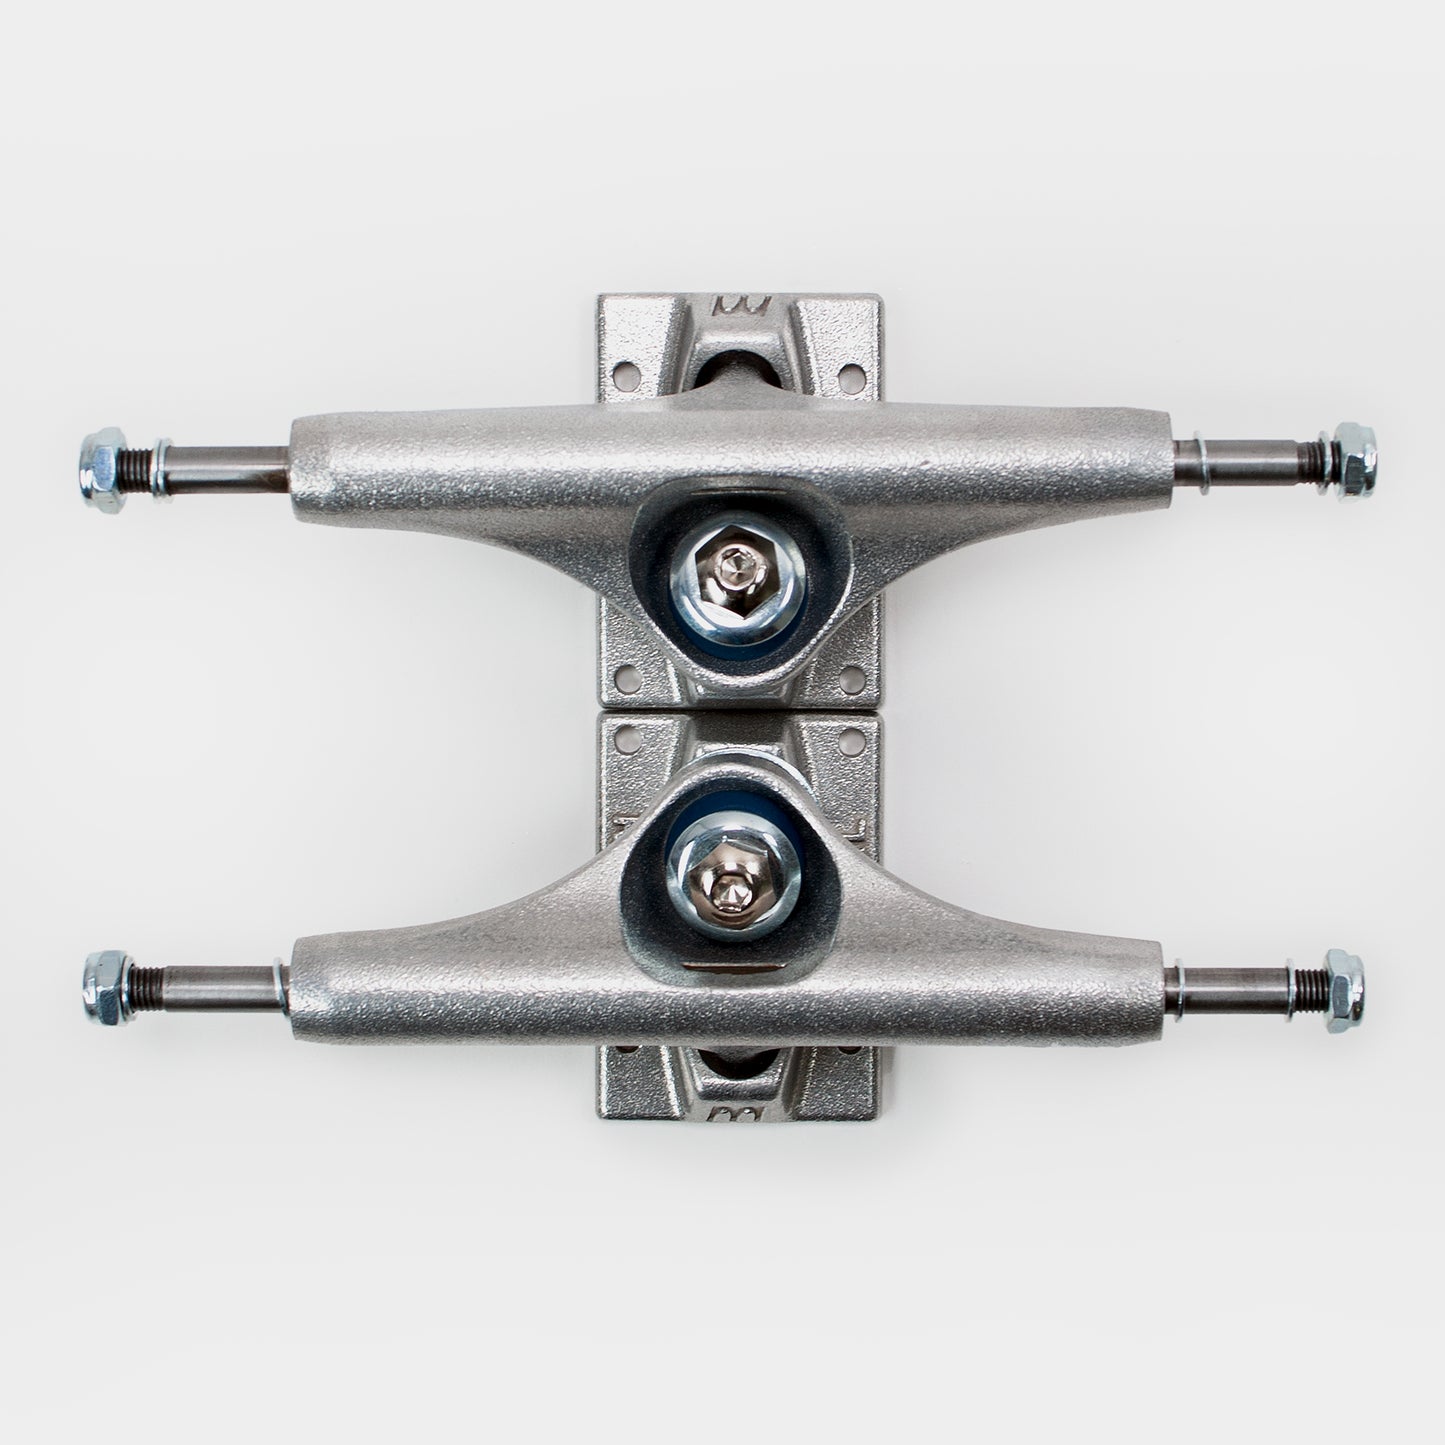 Royal FC Inverted Kingpin Raw Truck 159 (8.75") - Silver - (Sold as a pair) - Prime Delux Store